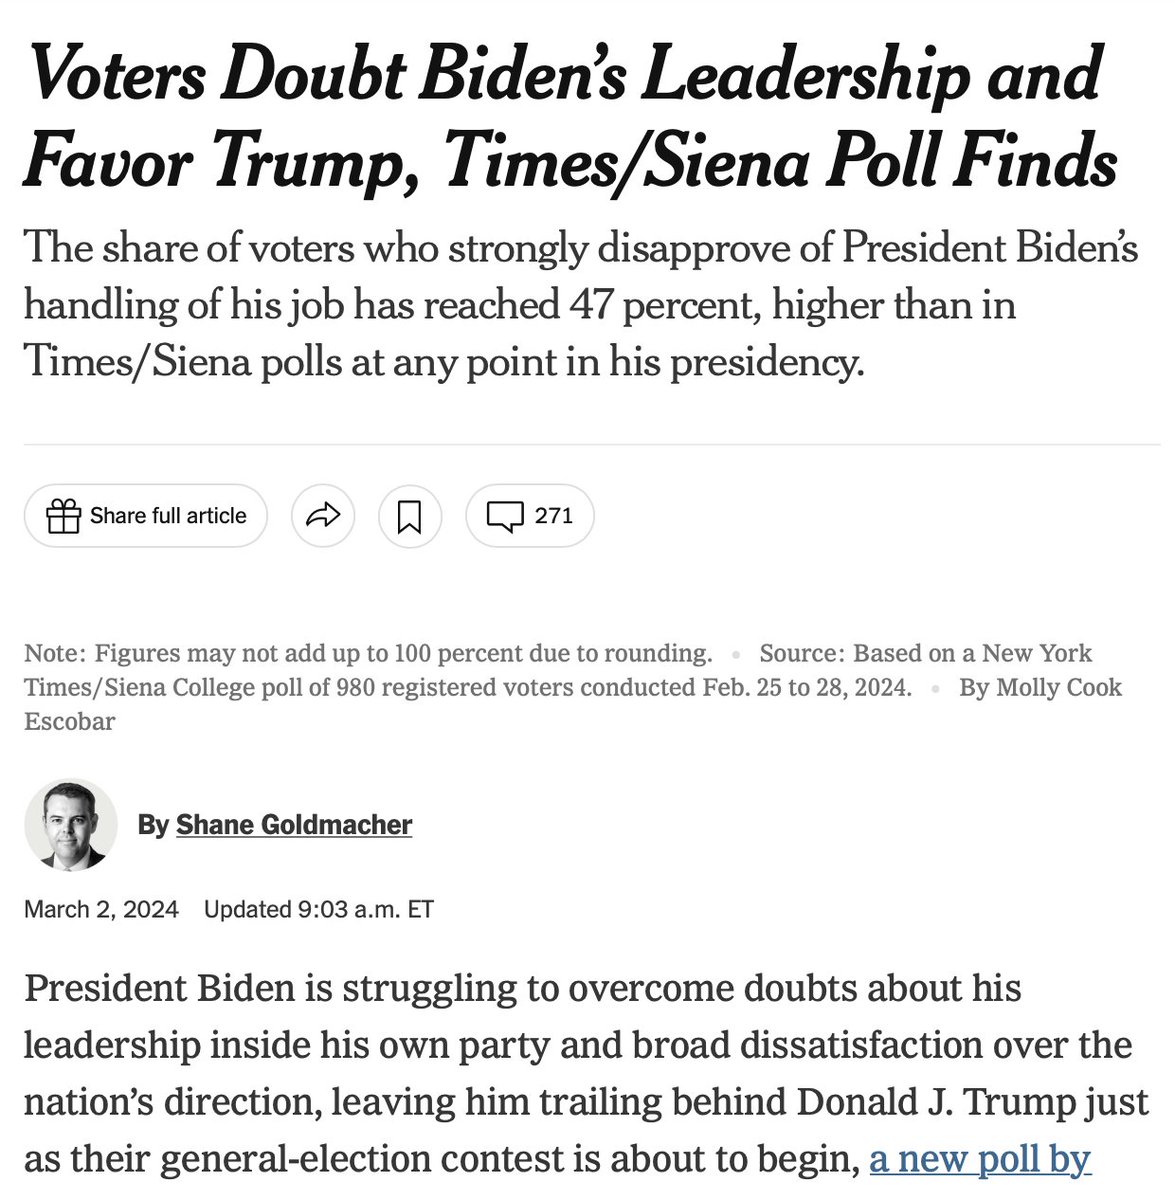 It is campaigning for Trump. So is Fox News but everyone understands what Fox is. Including Fox. I wonder if the Times even understands its own agenda with the persistent hard-on-Biden/soft-on-Trump takes that echo their coverage in 2016.